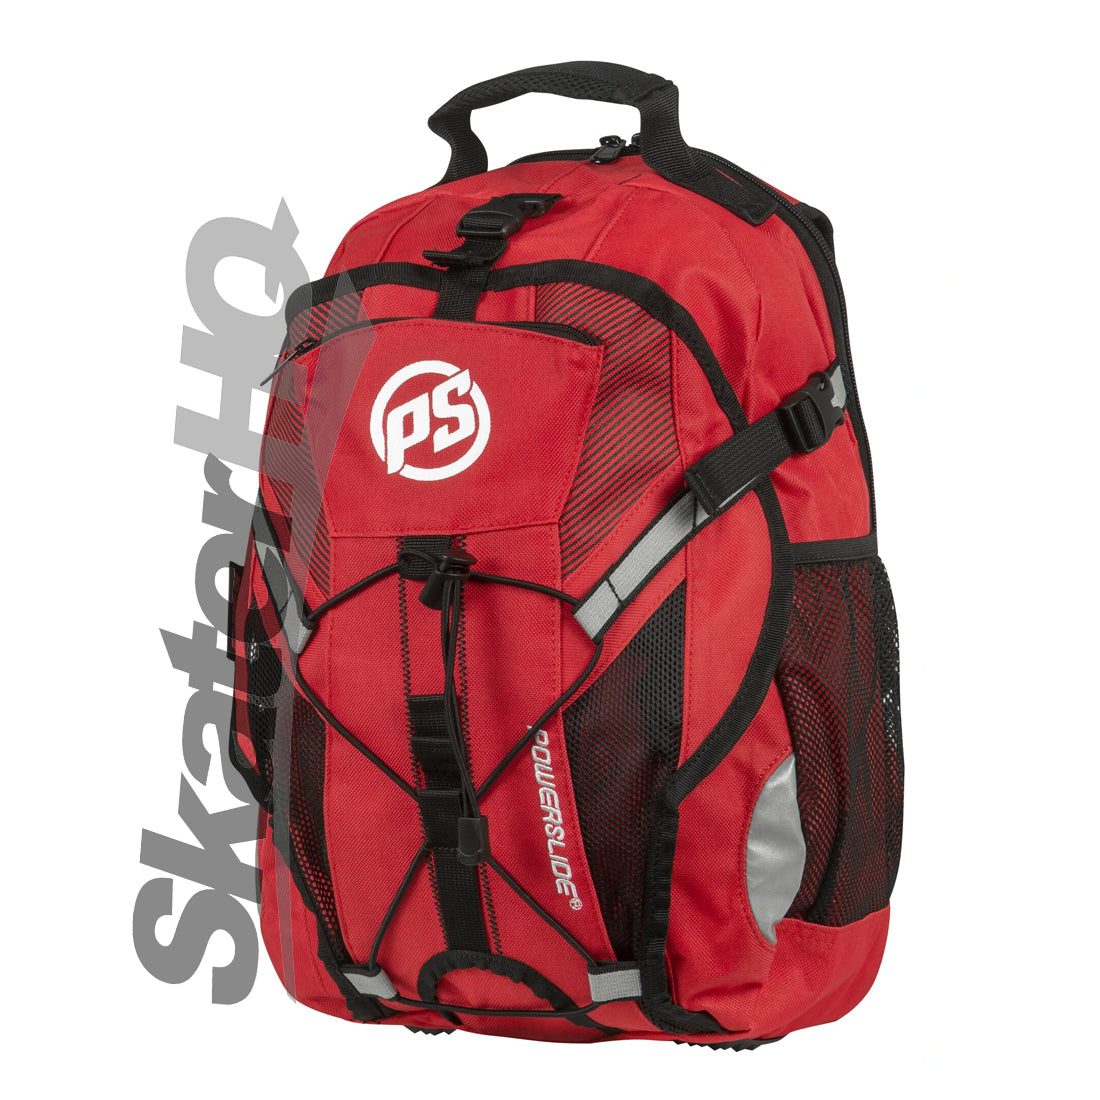 Powerslide Fitness Backpack - Red Bags and Backpacks